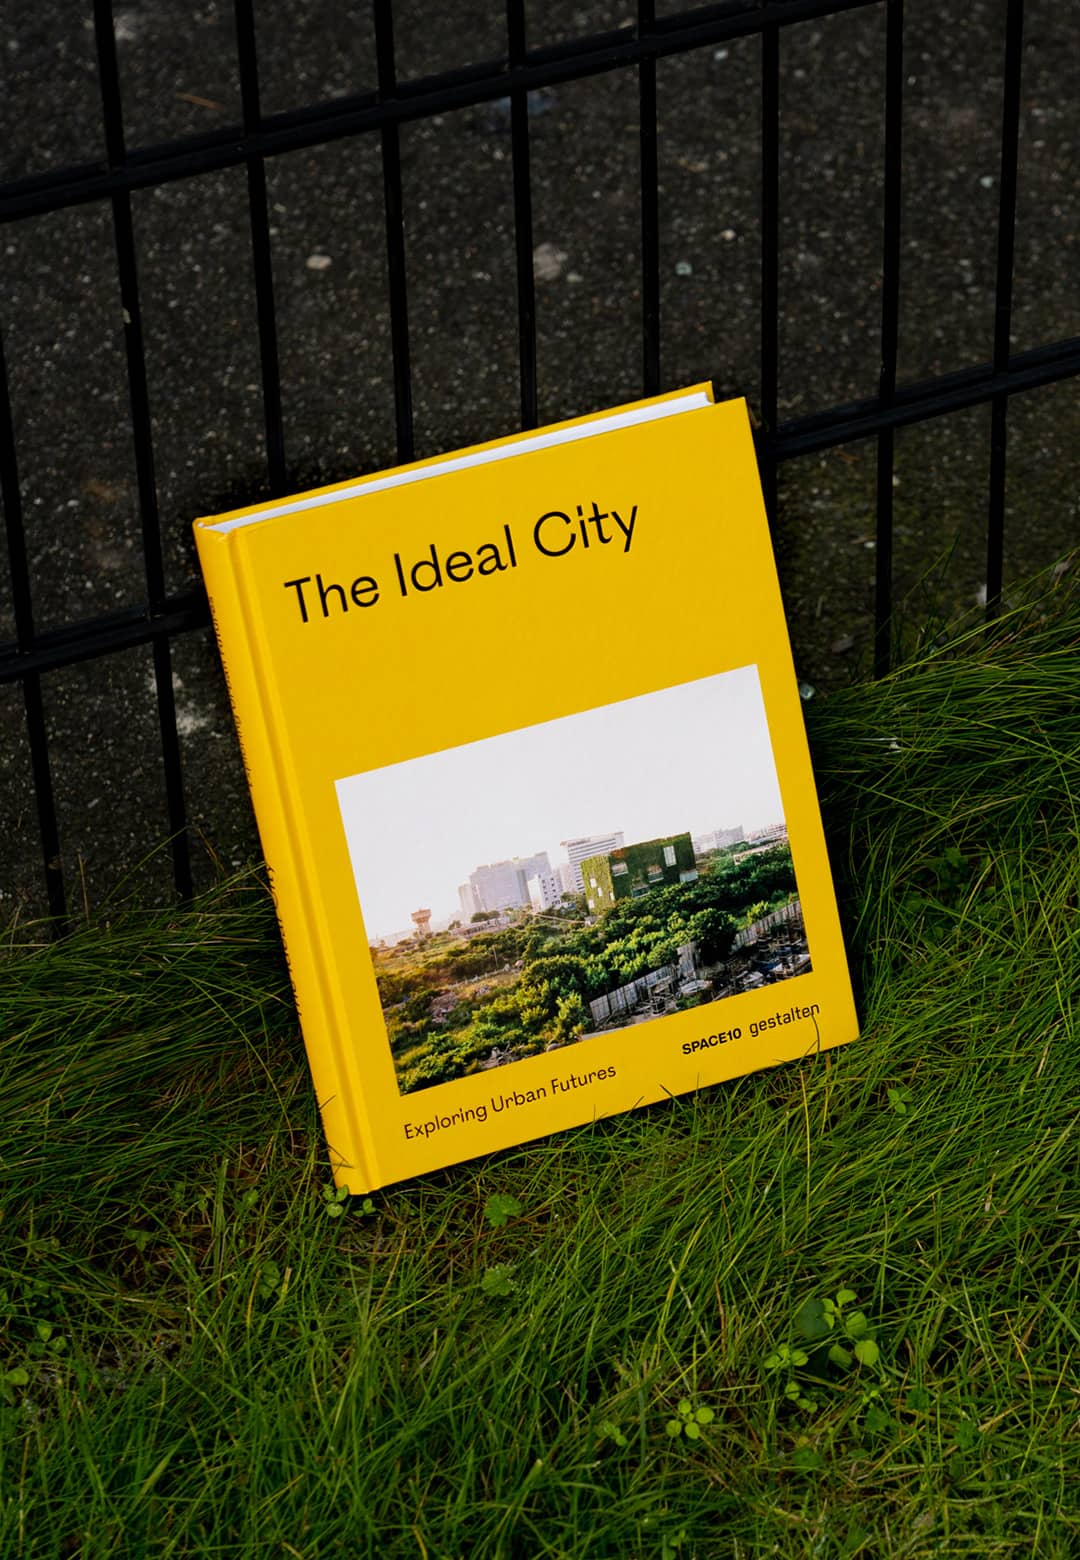 The Ideal City by SPACE10 explores a better urban future